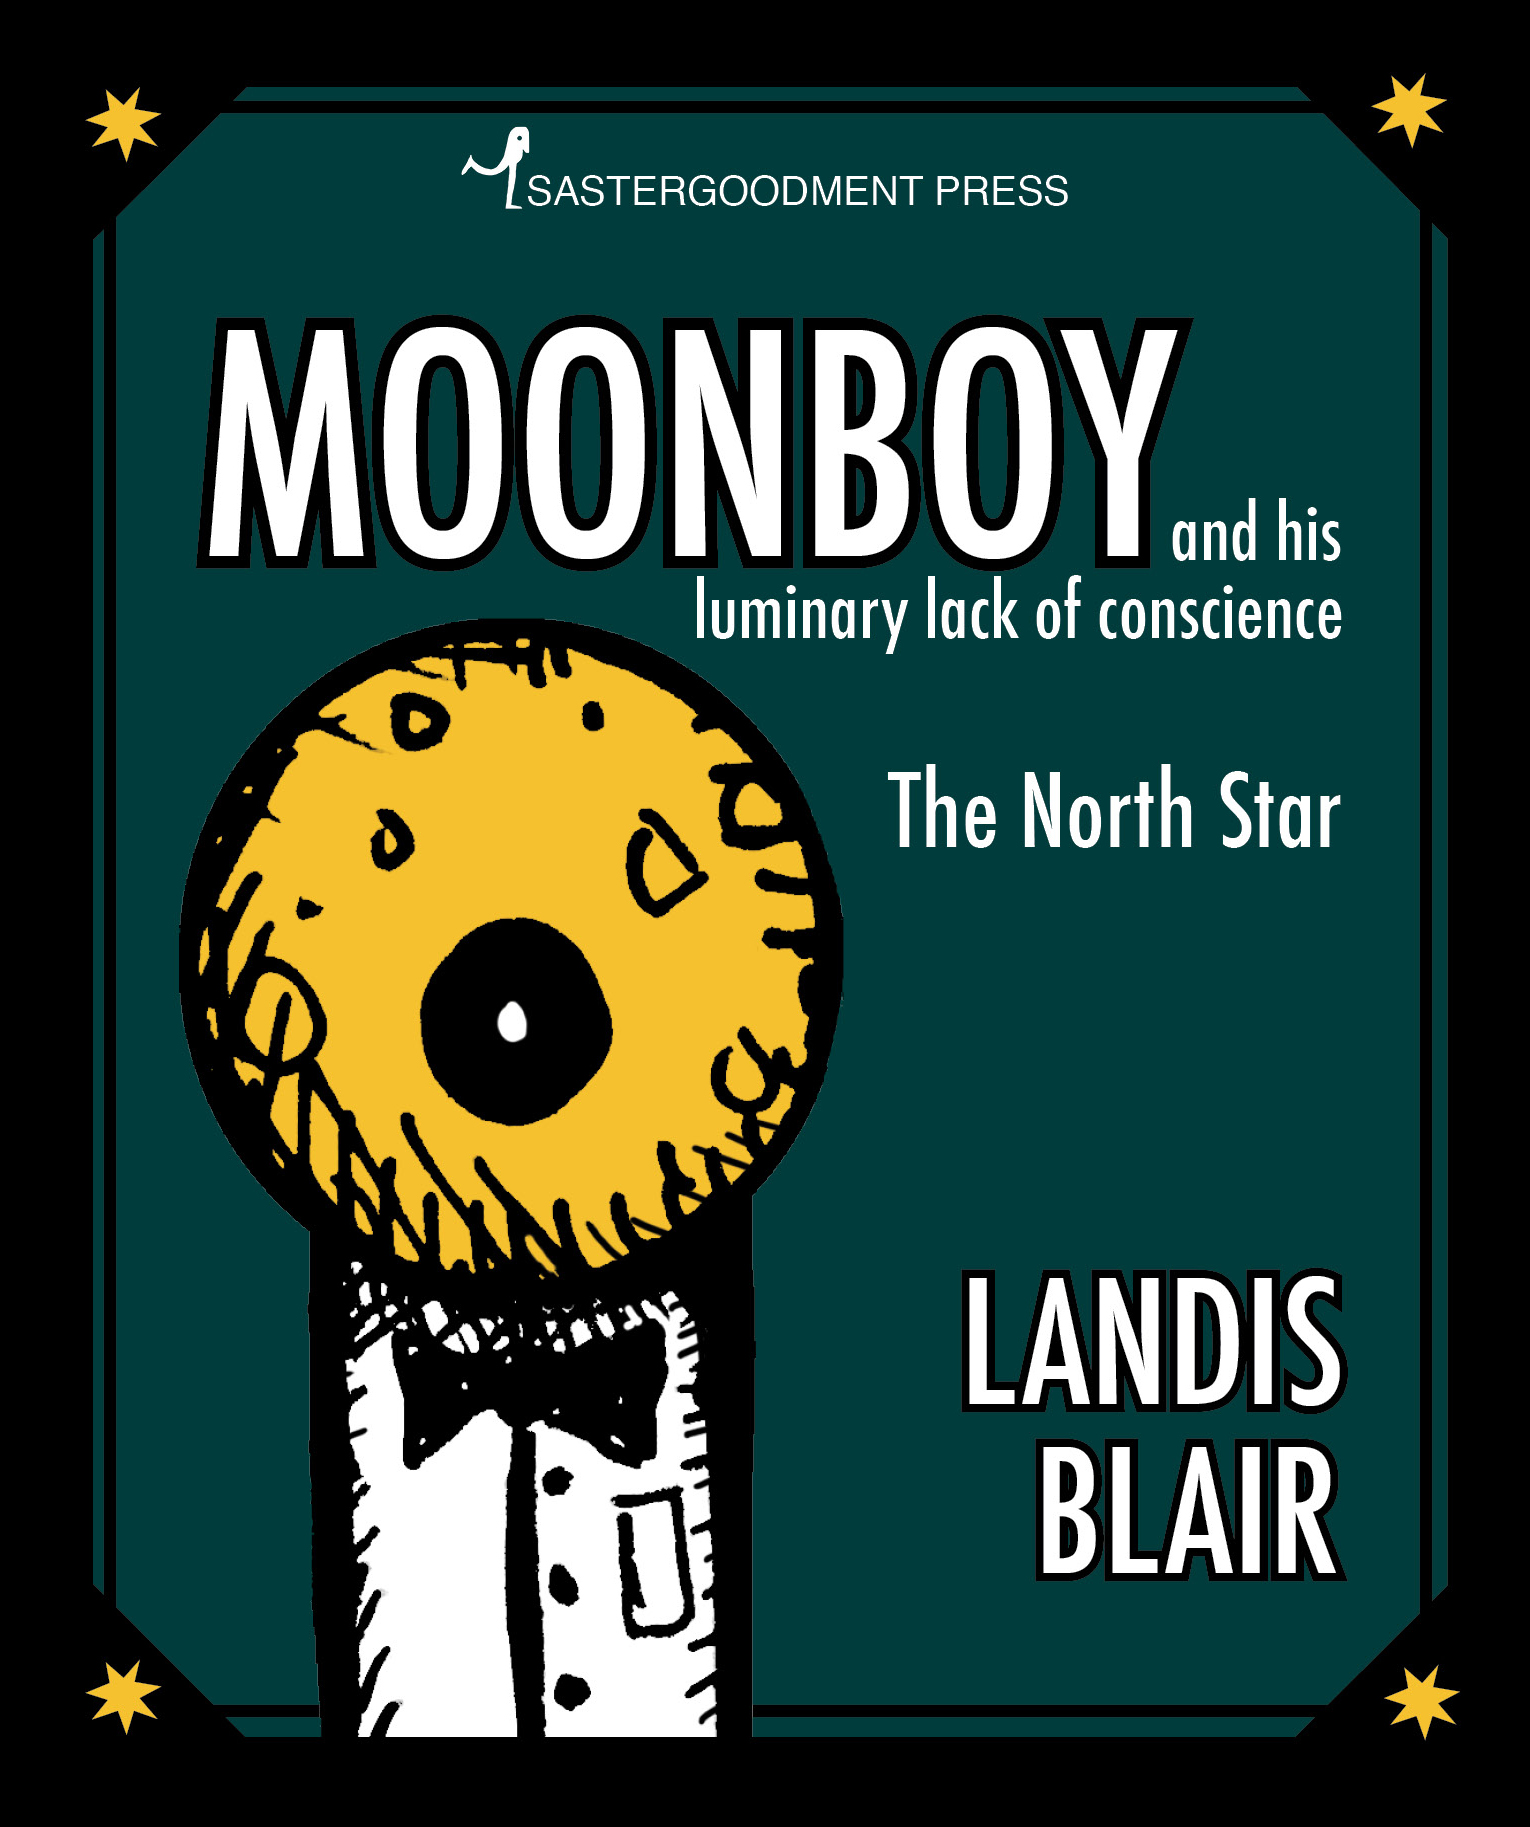  Moonboy, 2013  Written and illustrated by Landis Blair 